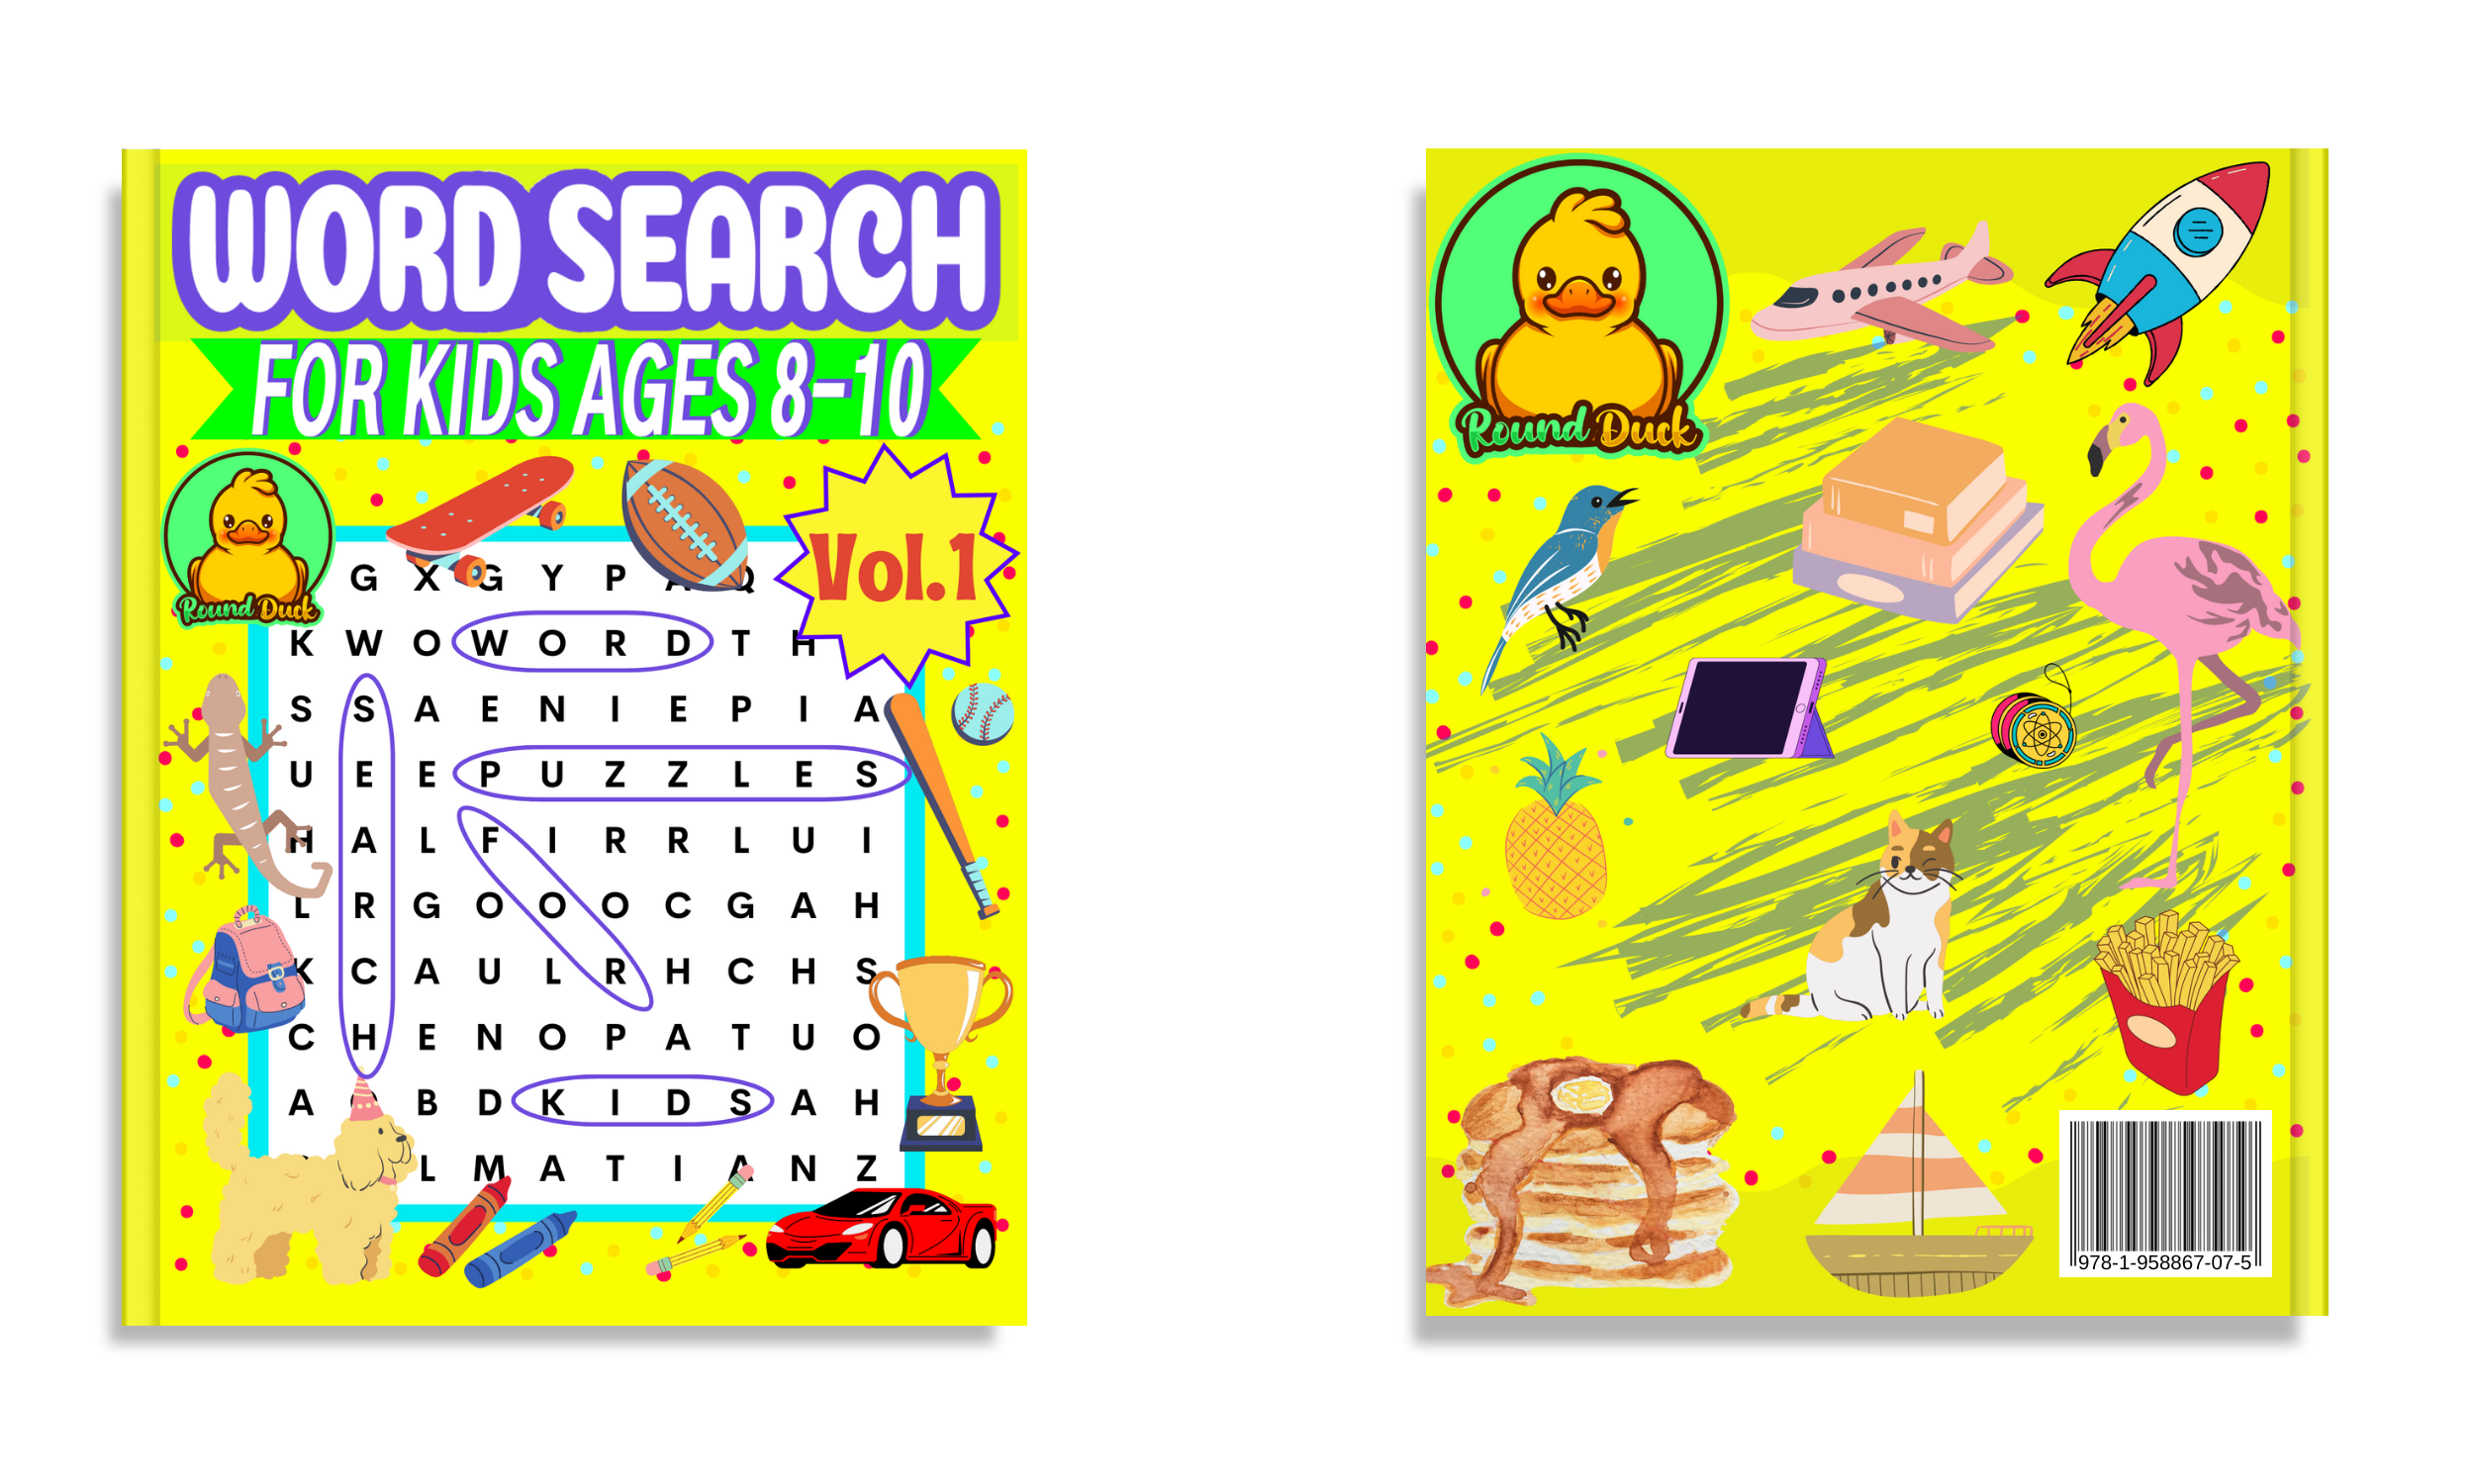 Word Search Books